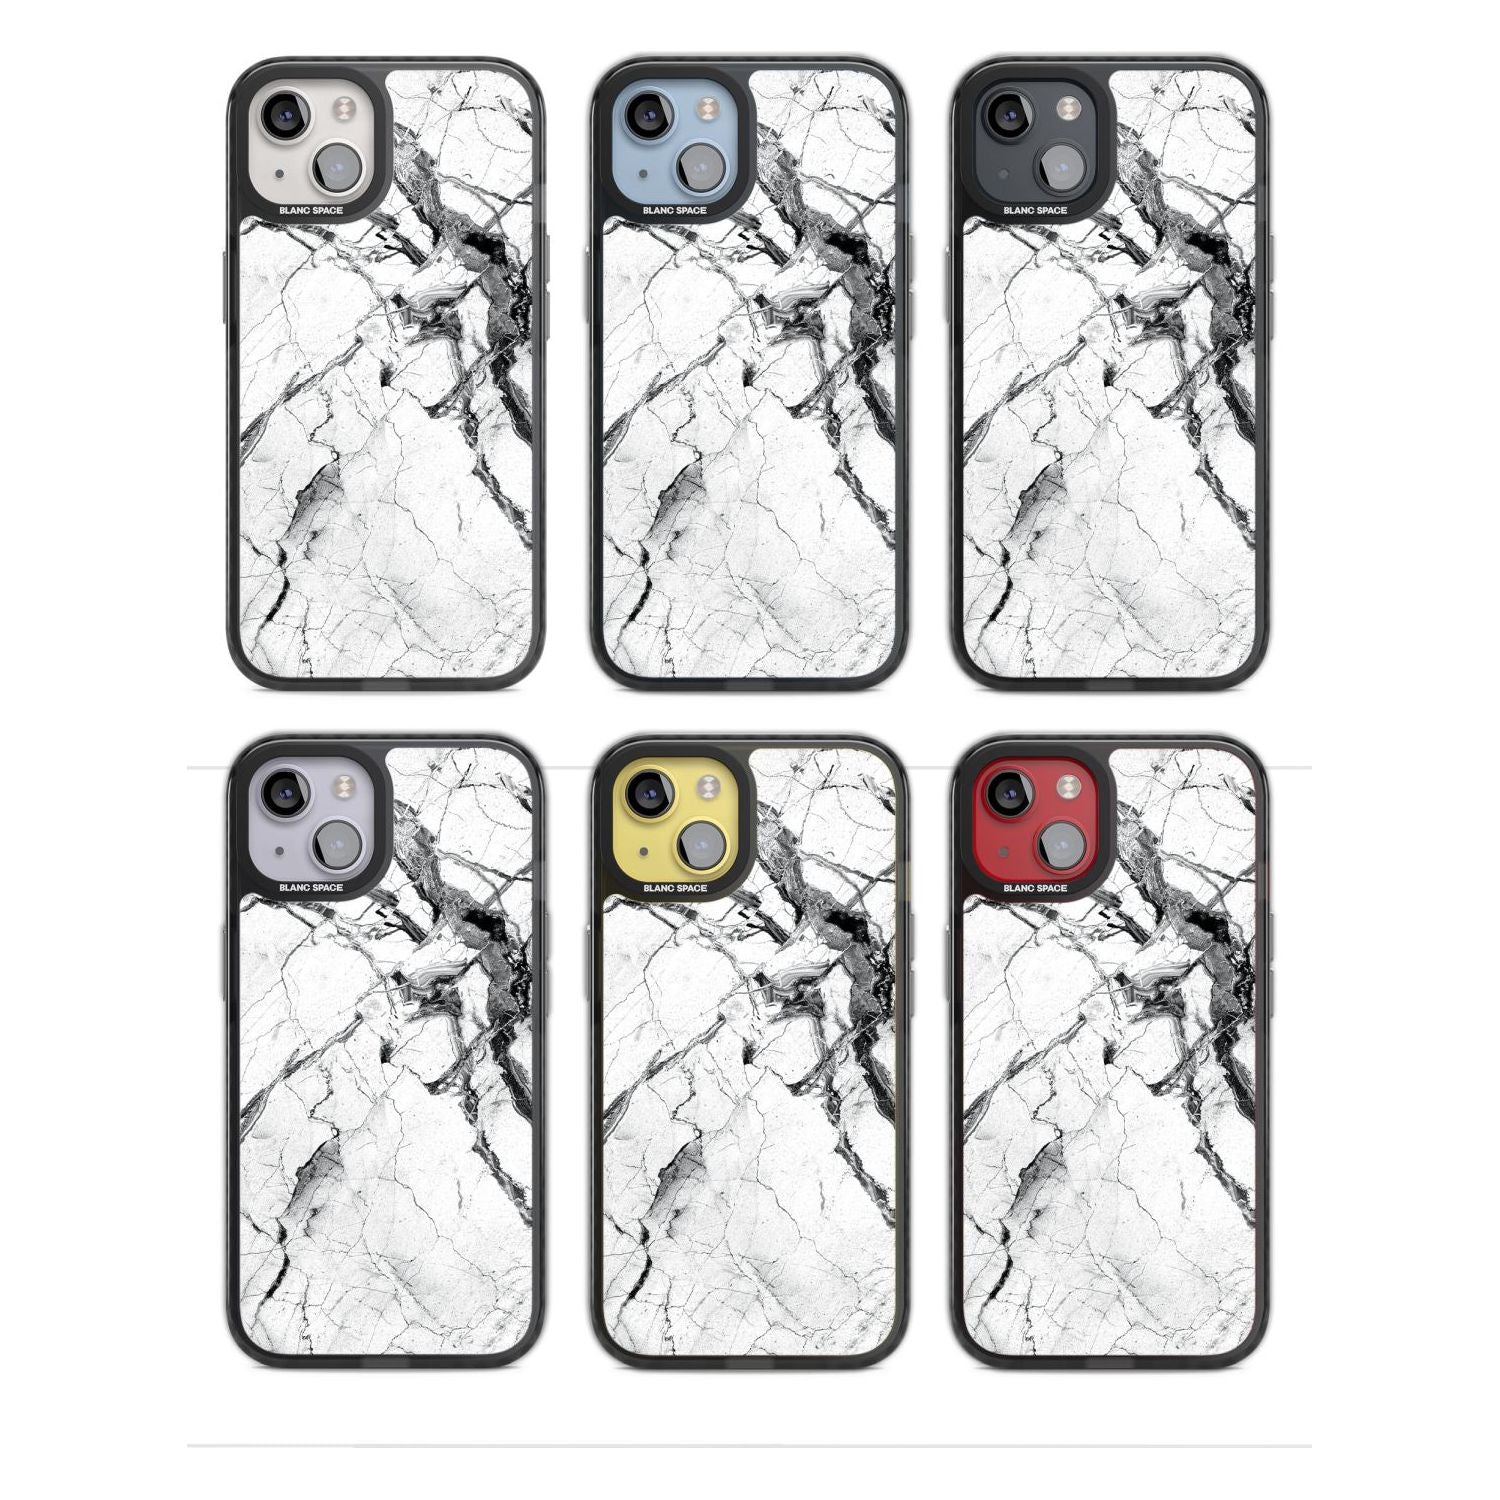 Black & White Stormy Marble Phone Case iPhone 15 Pro Max / Black Impact Case,iPhone 15 Plus / Black Impact Case,iPhone 15 Pro / Black Impact Case,iPhone 15 / Black Impact Case,iPhone 15 Pro Max / Impact Case,iPhone 15 Plus / Impact Case,iPhone 15 Pro / Impact Case,iPhone 15 / Impact Case,iPhone 15 Pro Max / Magsafe Black Impact Case,iPhone 15 Plus / Magsafe Black Impact Case,iPhone 15 Pro / Magsafe Black Impact Case,iPhone 15 / Magsafe Black Impact Case,iPhone 14 Pro Max / Black Impact Case,iPhone 14 Plus /